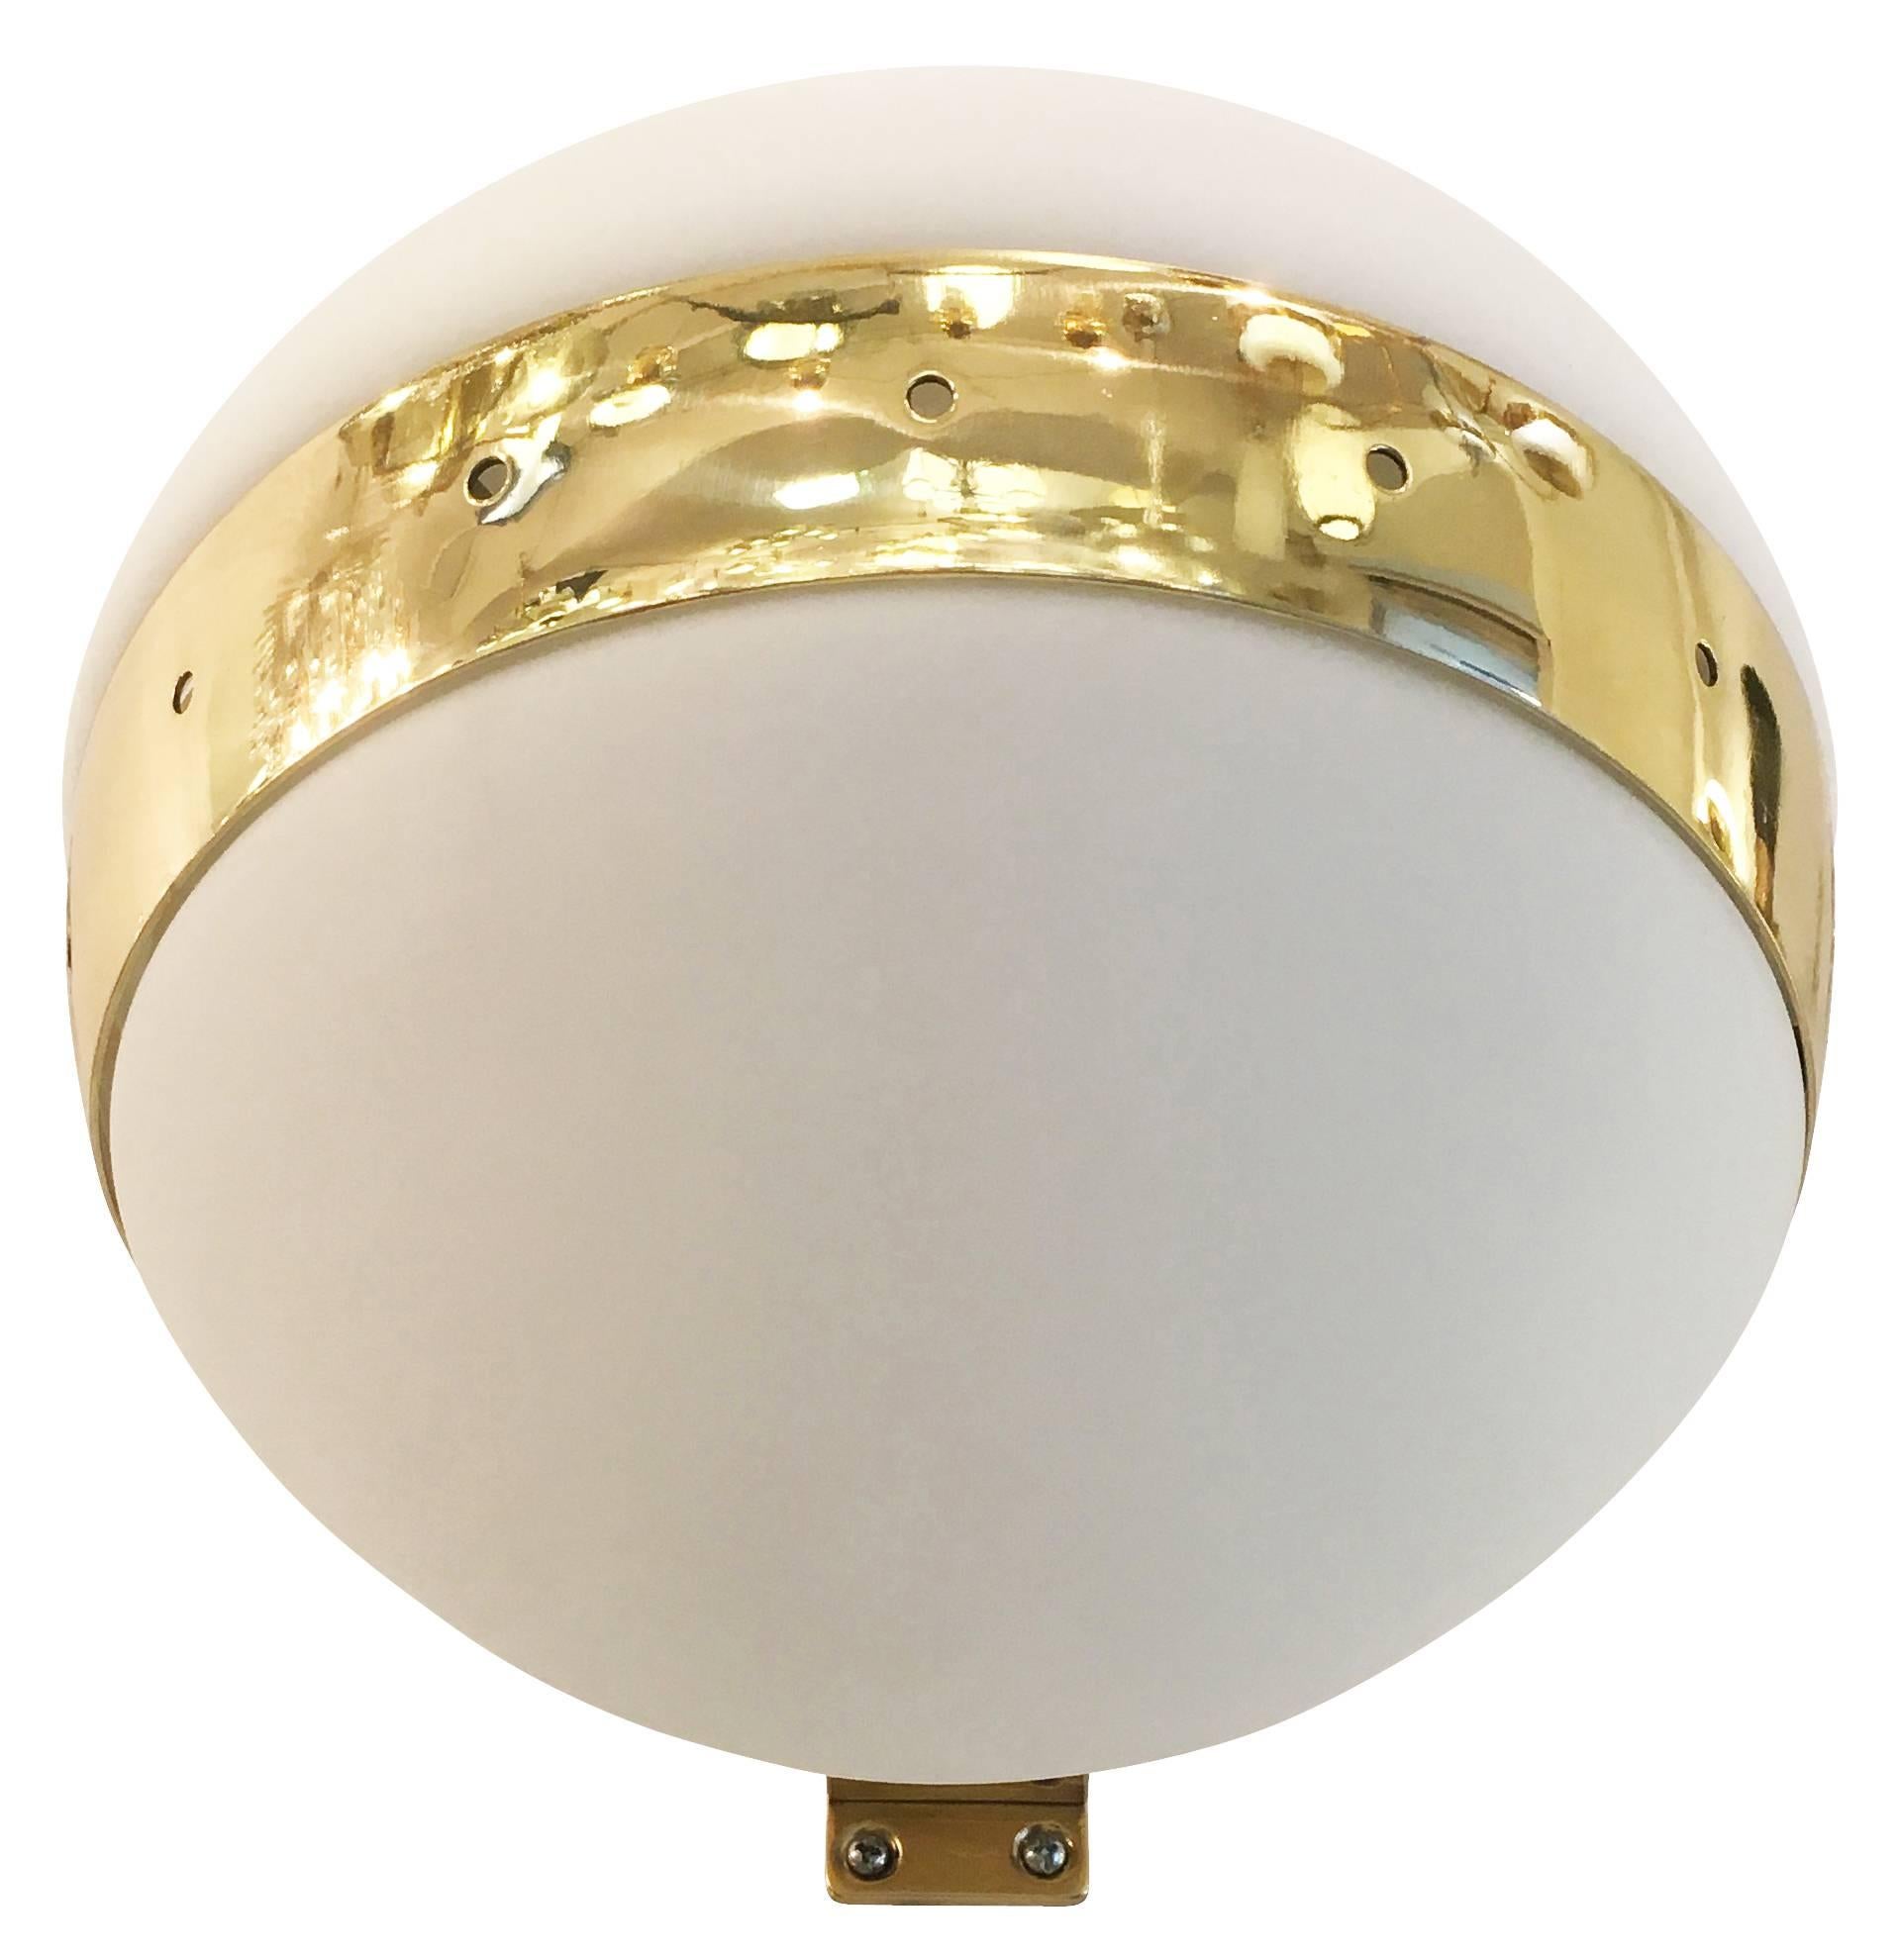 Round Italian midcentury wall lights, each featuring a polished brass frame with two frosted glass shades. Three available. Sold Individually. Price per light.

Condition: Excellent vintage condition, minor wear consistent with age and